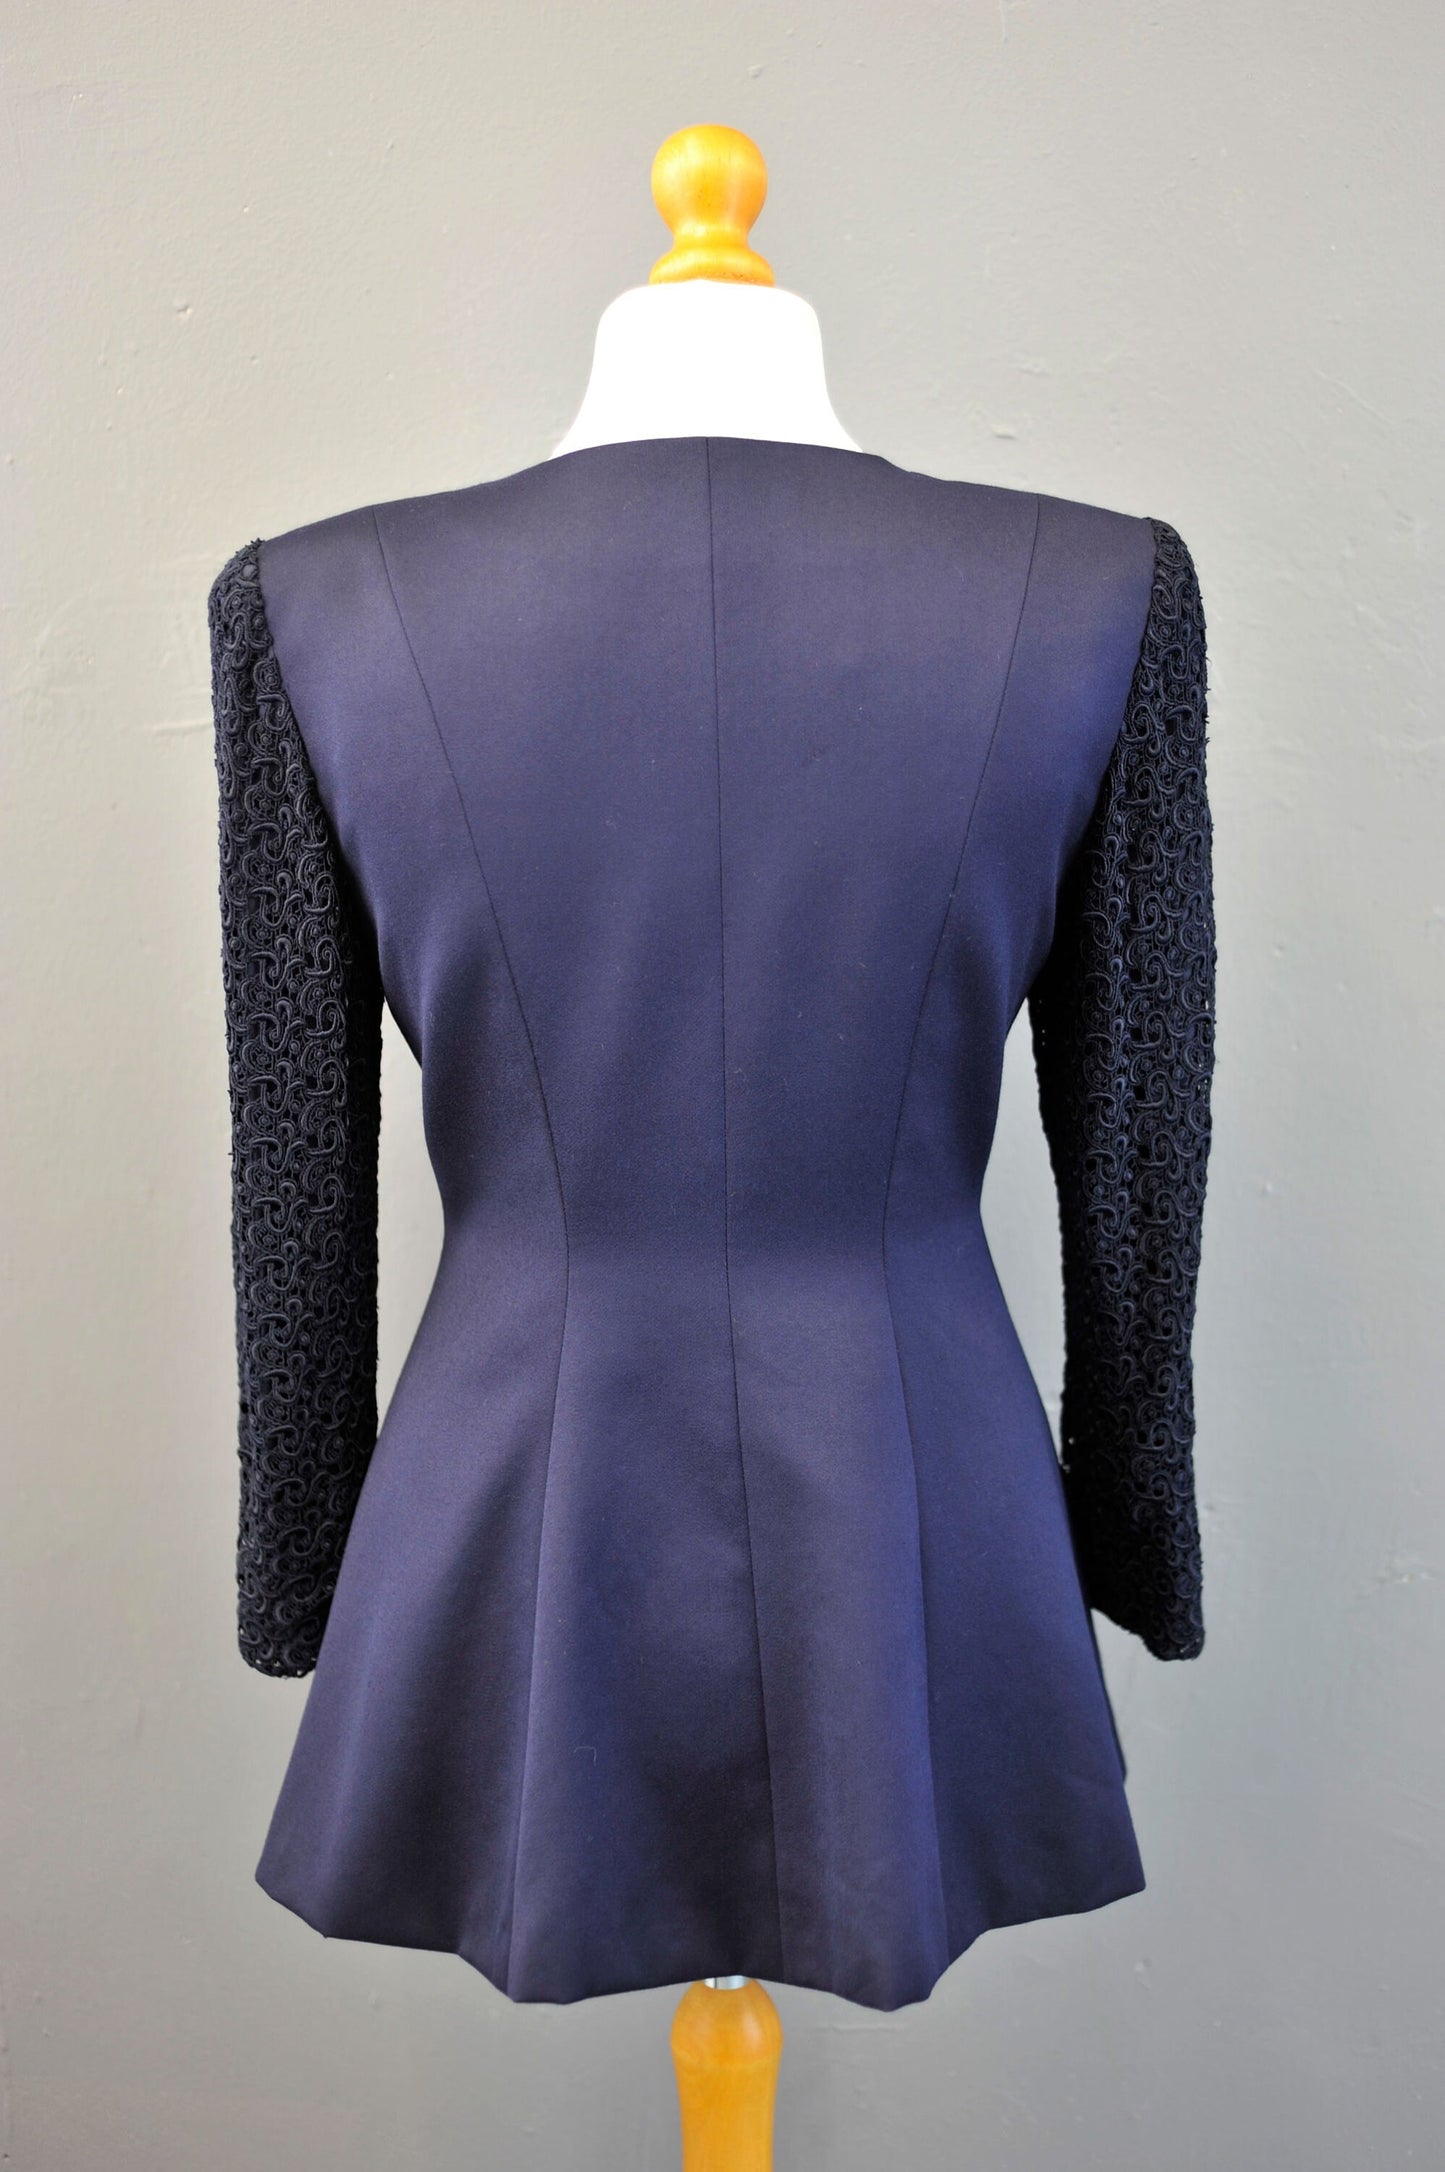 90s Tailored Navy Wool Jacket with Guipure Lace Sleeves, Long Collarless Blazer, Size Medium